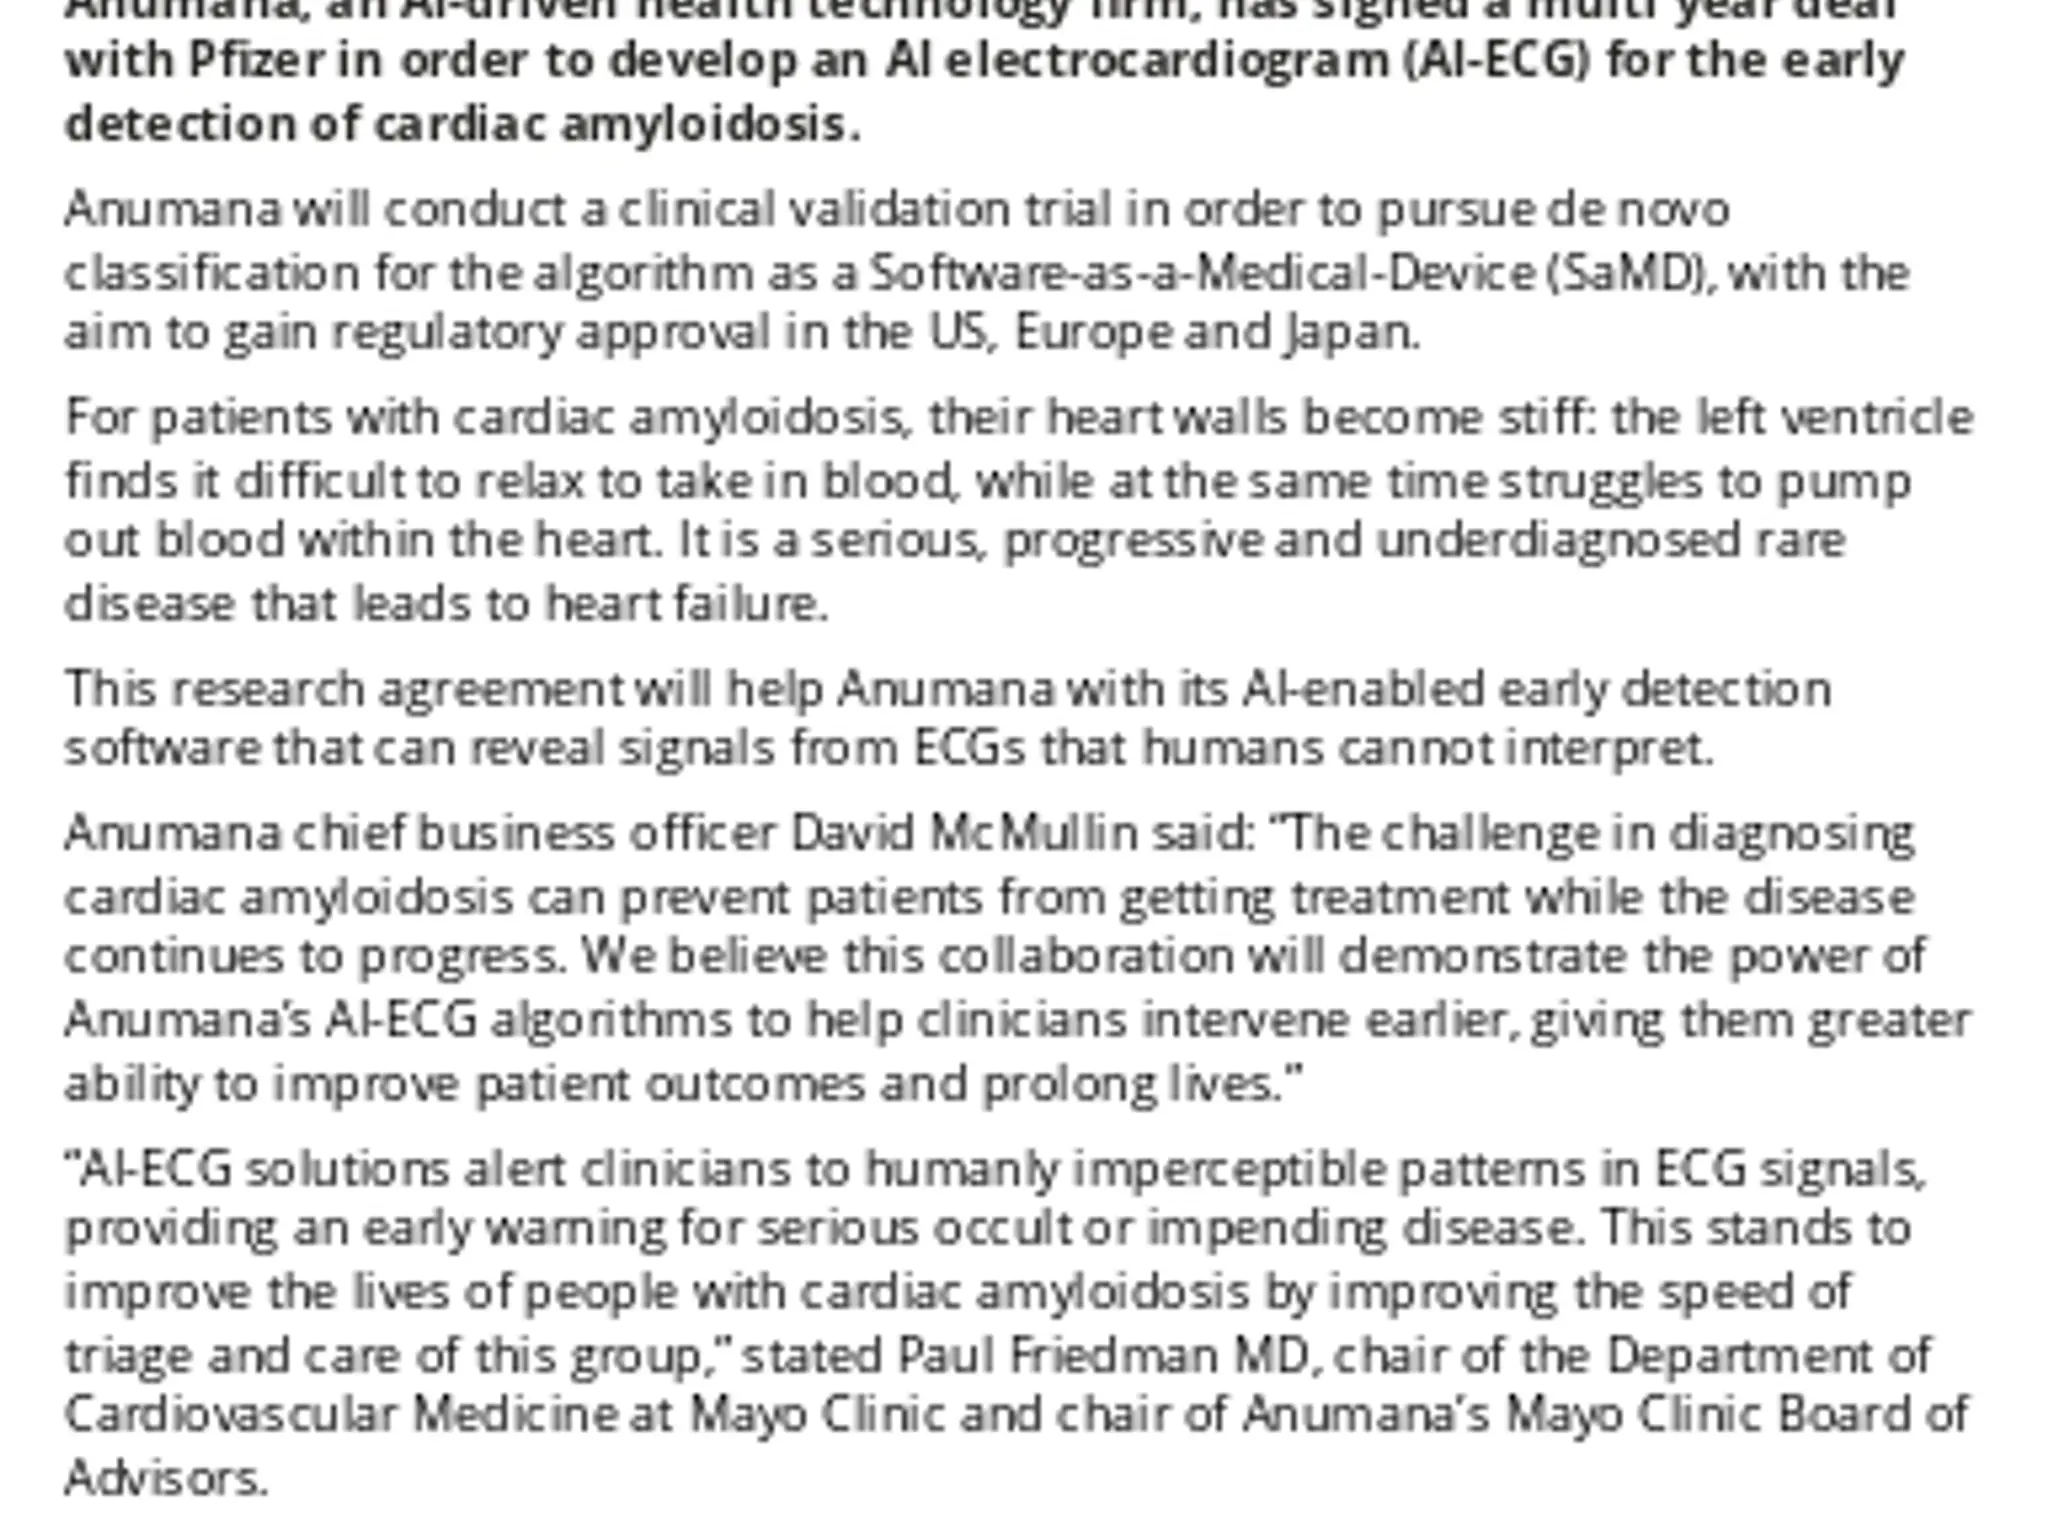 Anumana And Pfizer Team Up On AI-enabled ECG Algorithm For Detection Of Cardiovascular Disease